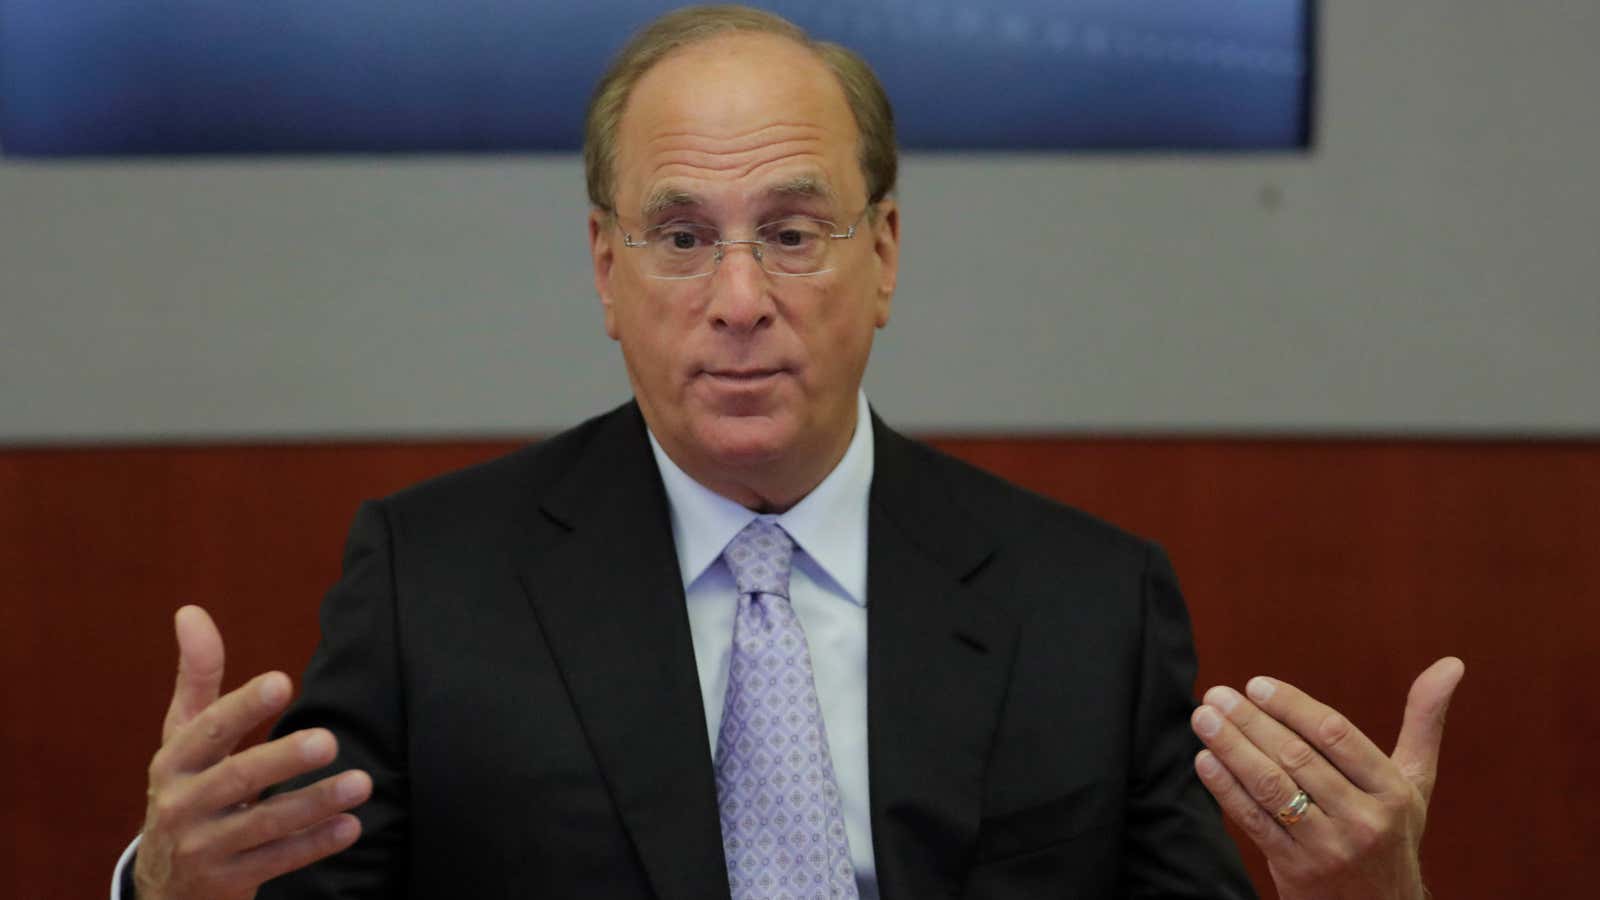 Investors, and Larry Fink, have been winners from the passive boom so far.